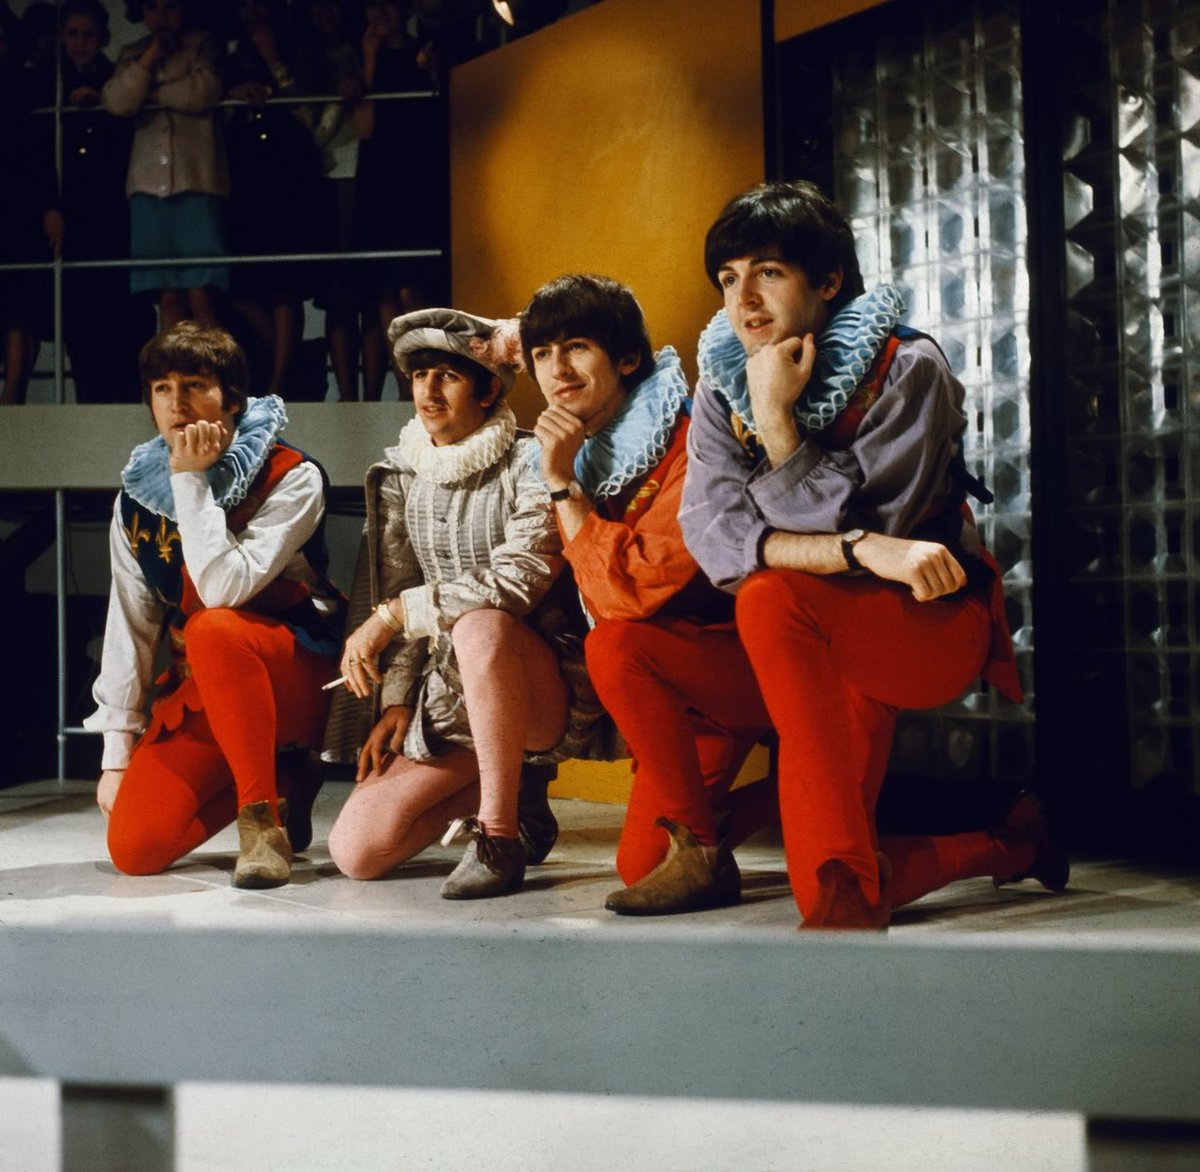 27 April 1964 – The Beatles undertake a full dress-rehearsal in front of a live audience at Wembley Studios in London, ahead of tomorrow’s ‘Around The Beatles’ TV special taping. Elsewhere, the single ‘Love Me Do/PS I Love You’ is issued in the USA by Vee-Jay Records. #TheBeatles